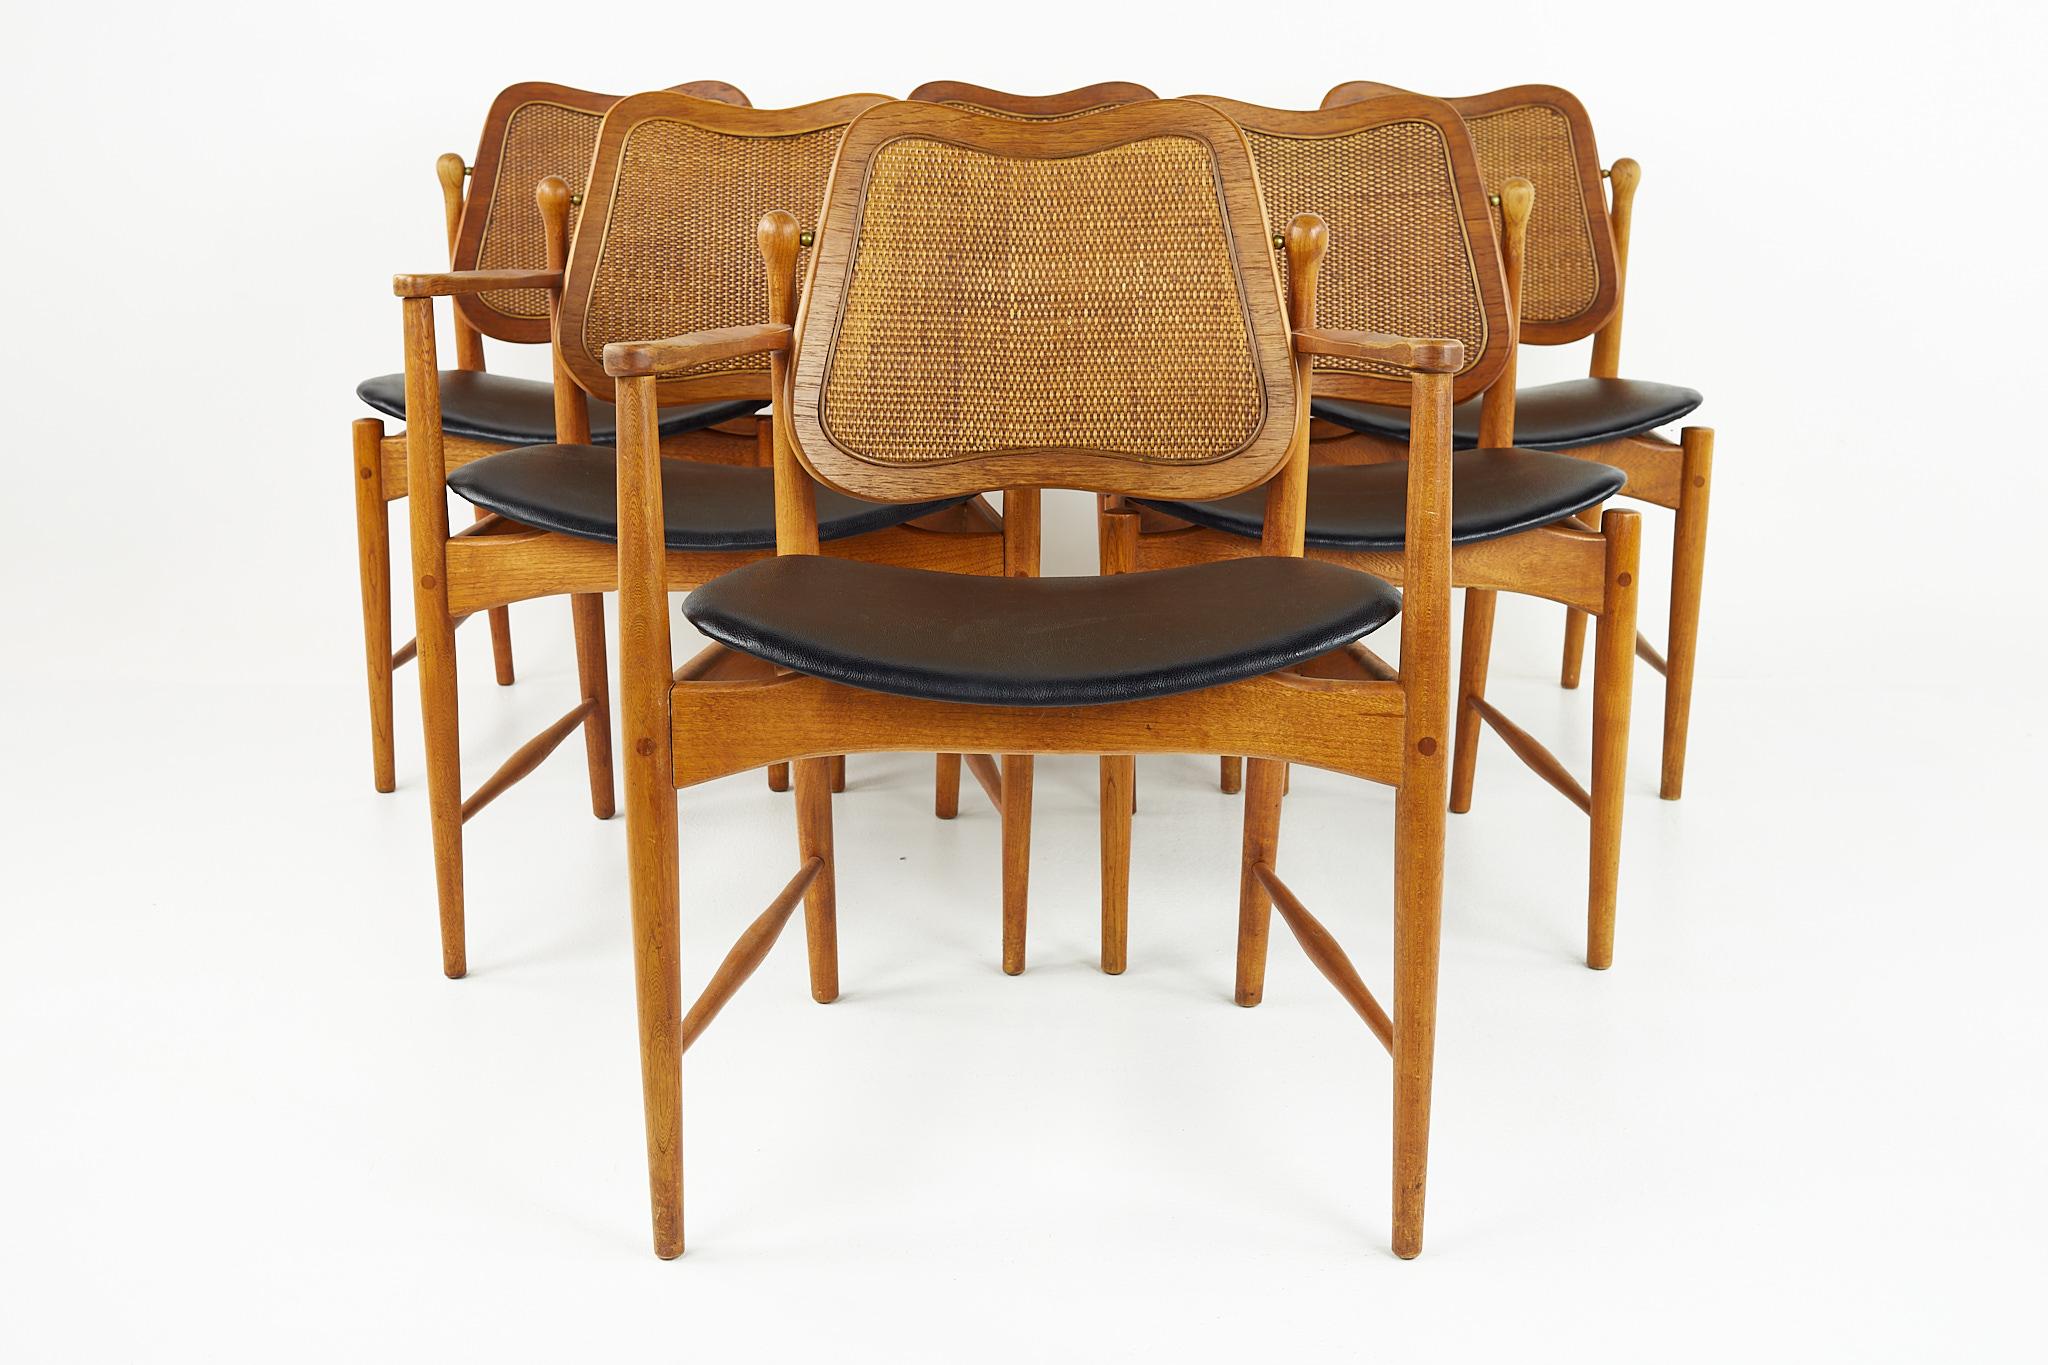 Arne Vodder mid century teak and cane dining chairs - set of 6

Each chair measures: 23.5 wide x 21 deep x 32 high, with a seat height of 19.5 and arm height of 26 inches

?All pieces of furniture can be had in what we call restored vintage